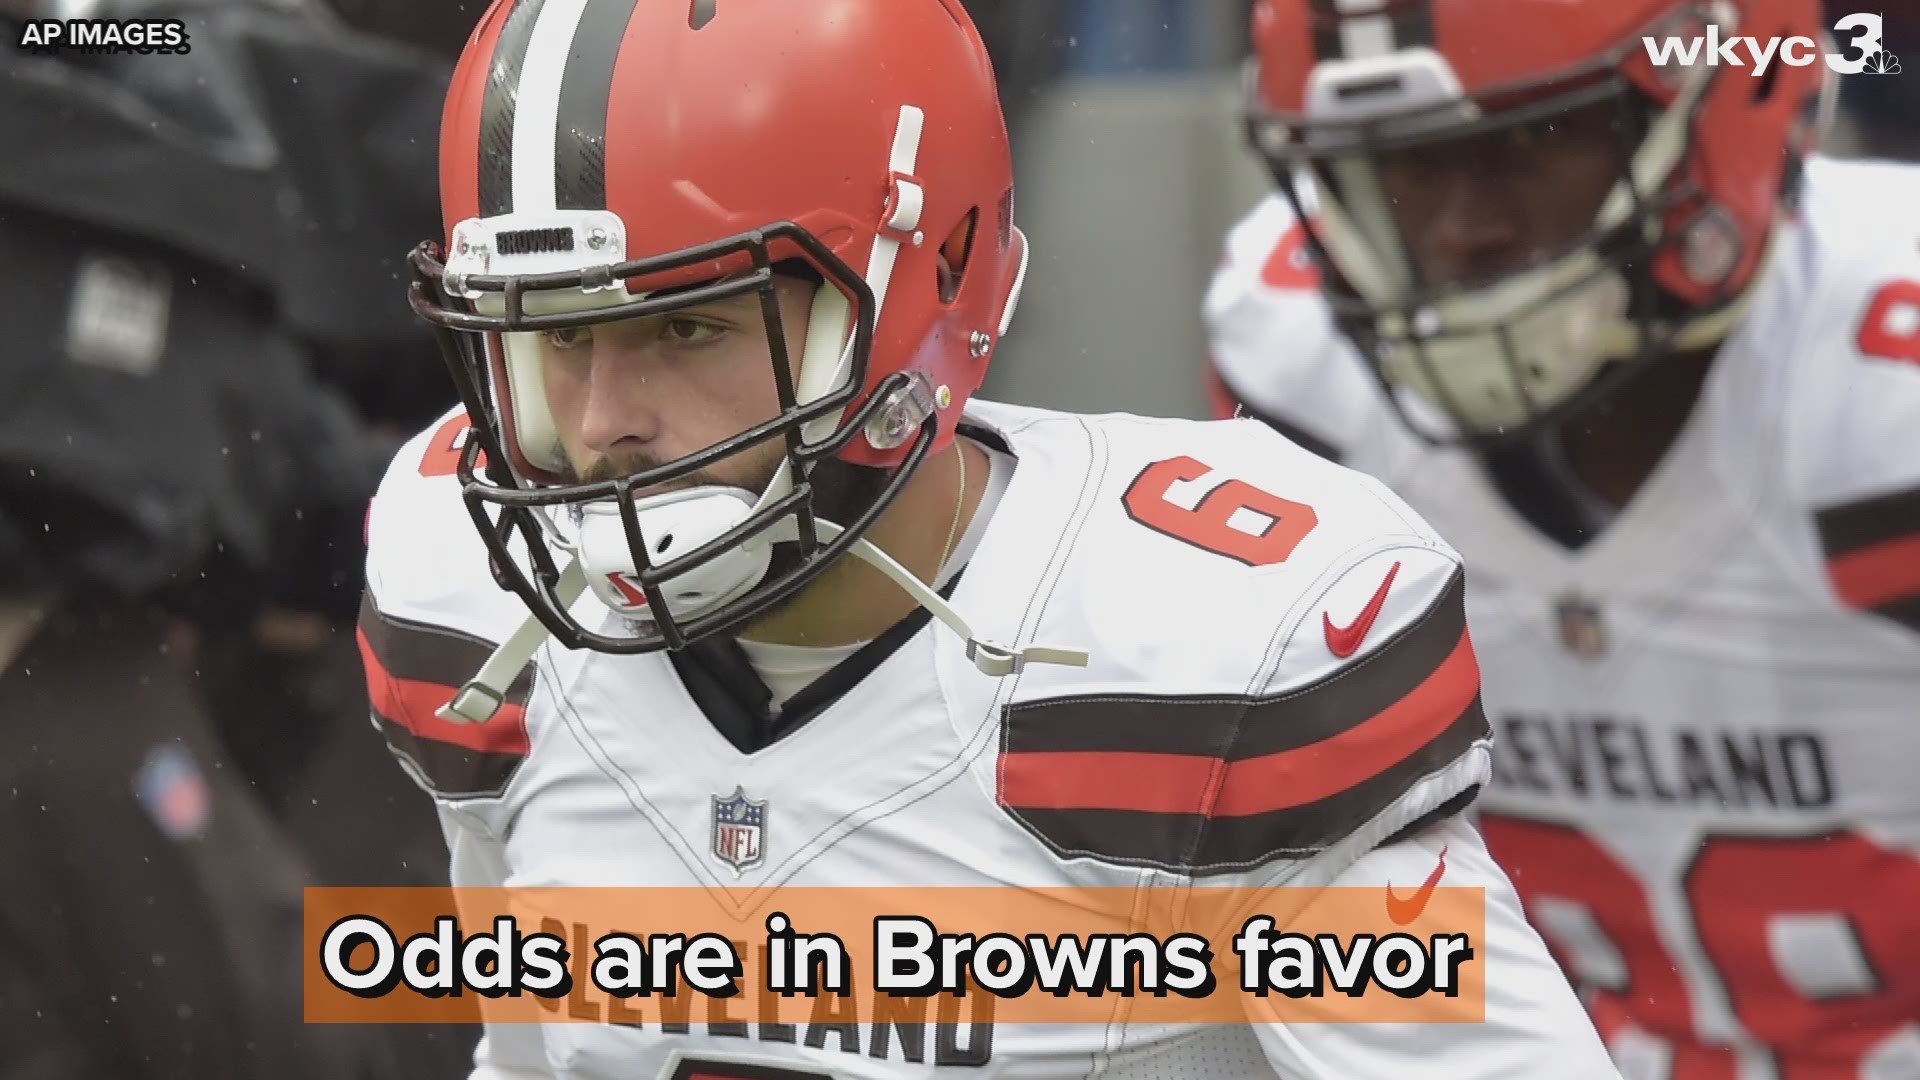 Cleveland Browns remain favored to win AFC North Division